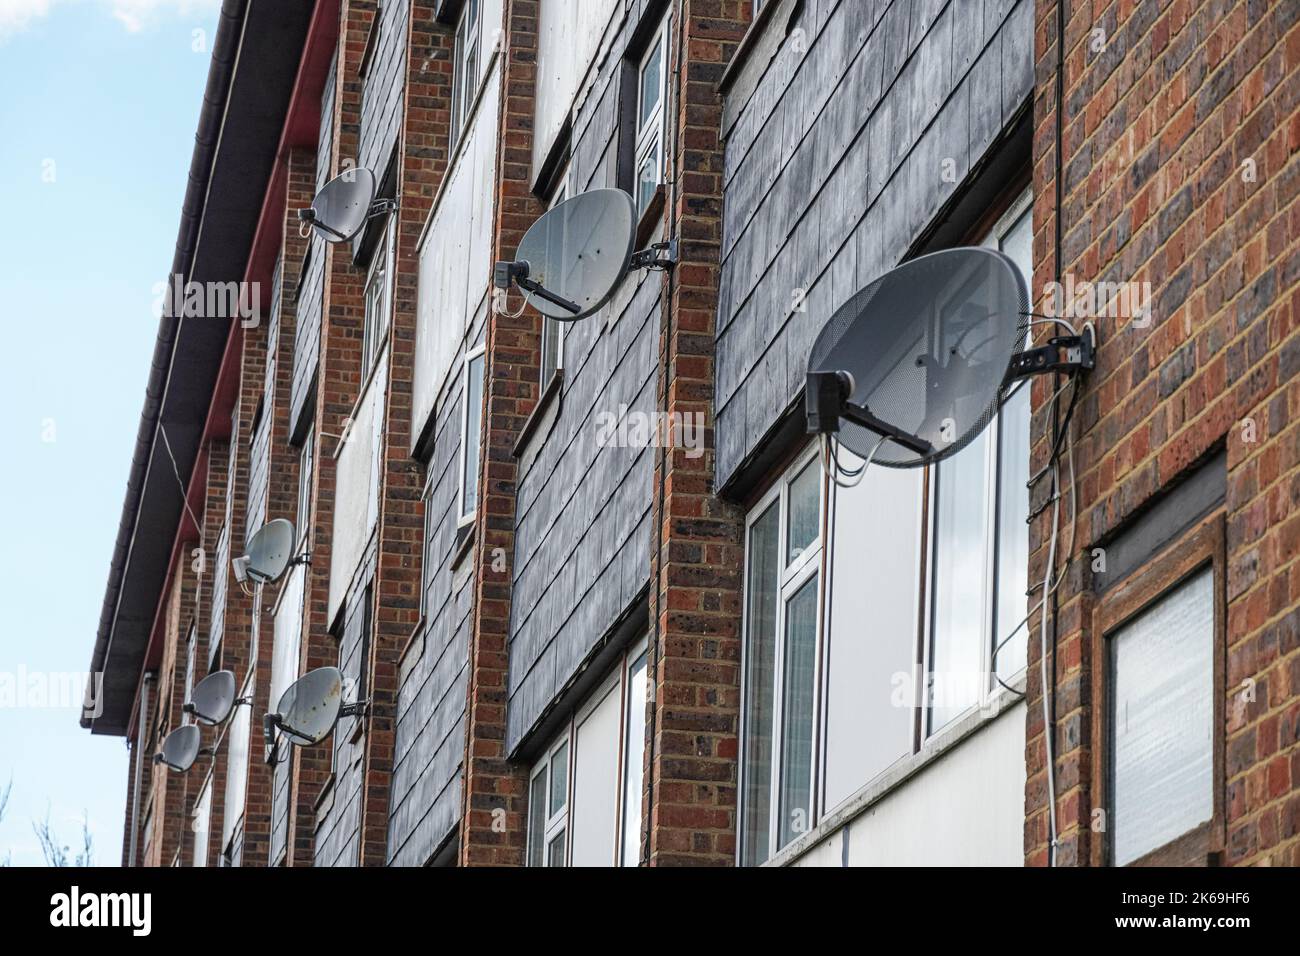 Satellite dishes on a wall of residential block, London, England United Kingdom UK Stock Photo